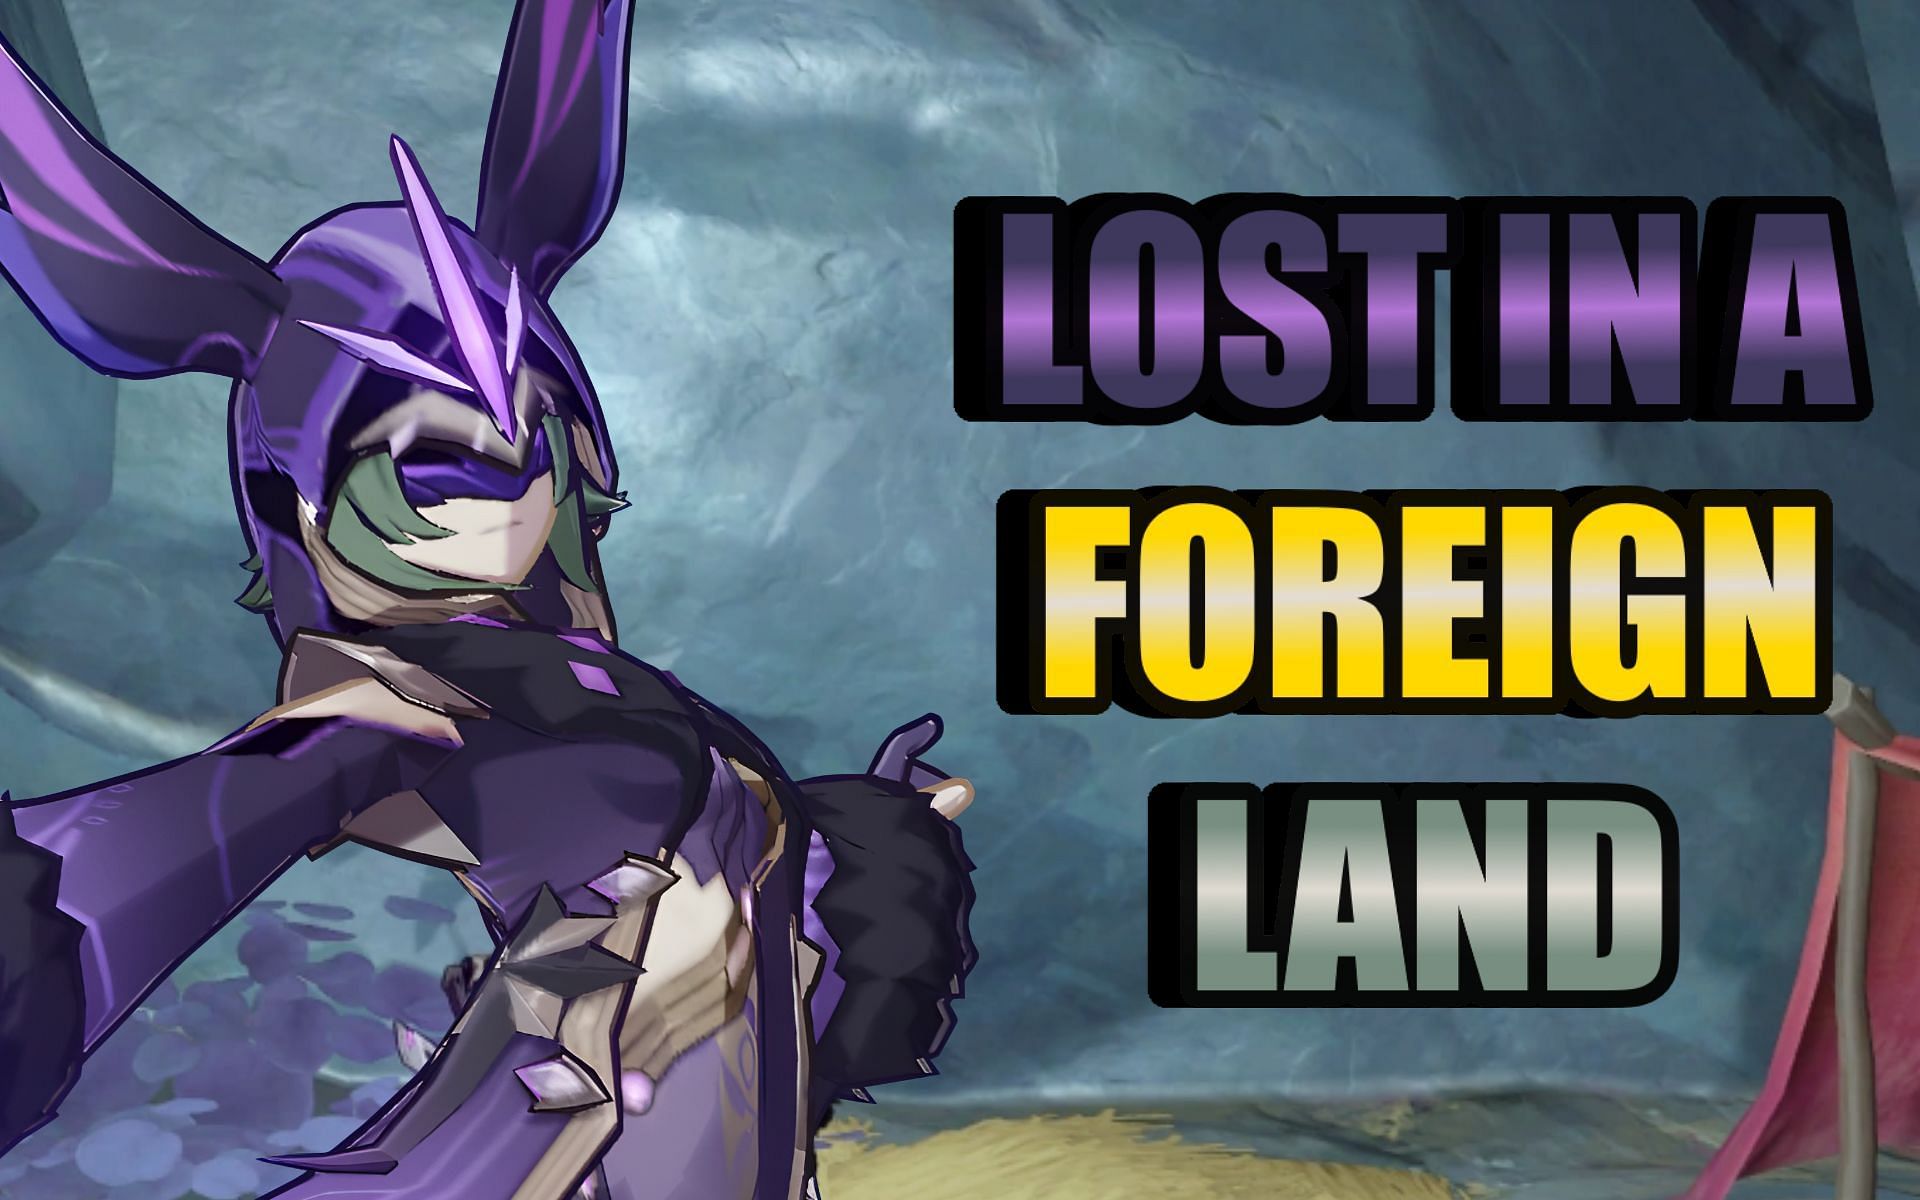 Lost in a Foreign Land is an interesting quest series in Genshin Impact with a cliffhanger (Image via miHoYo)